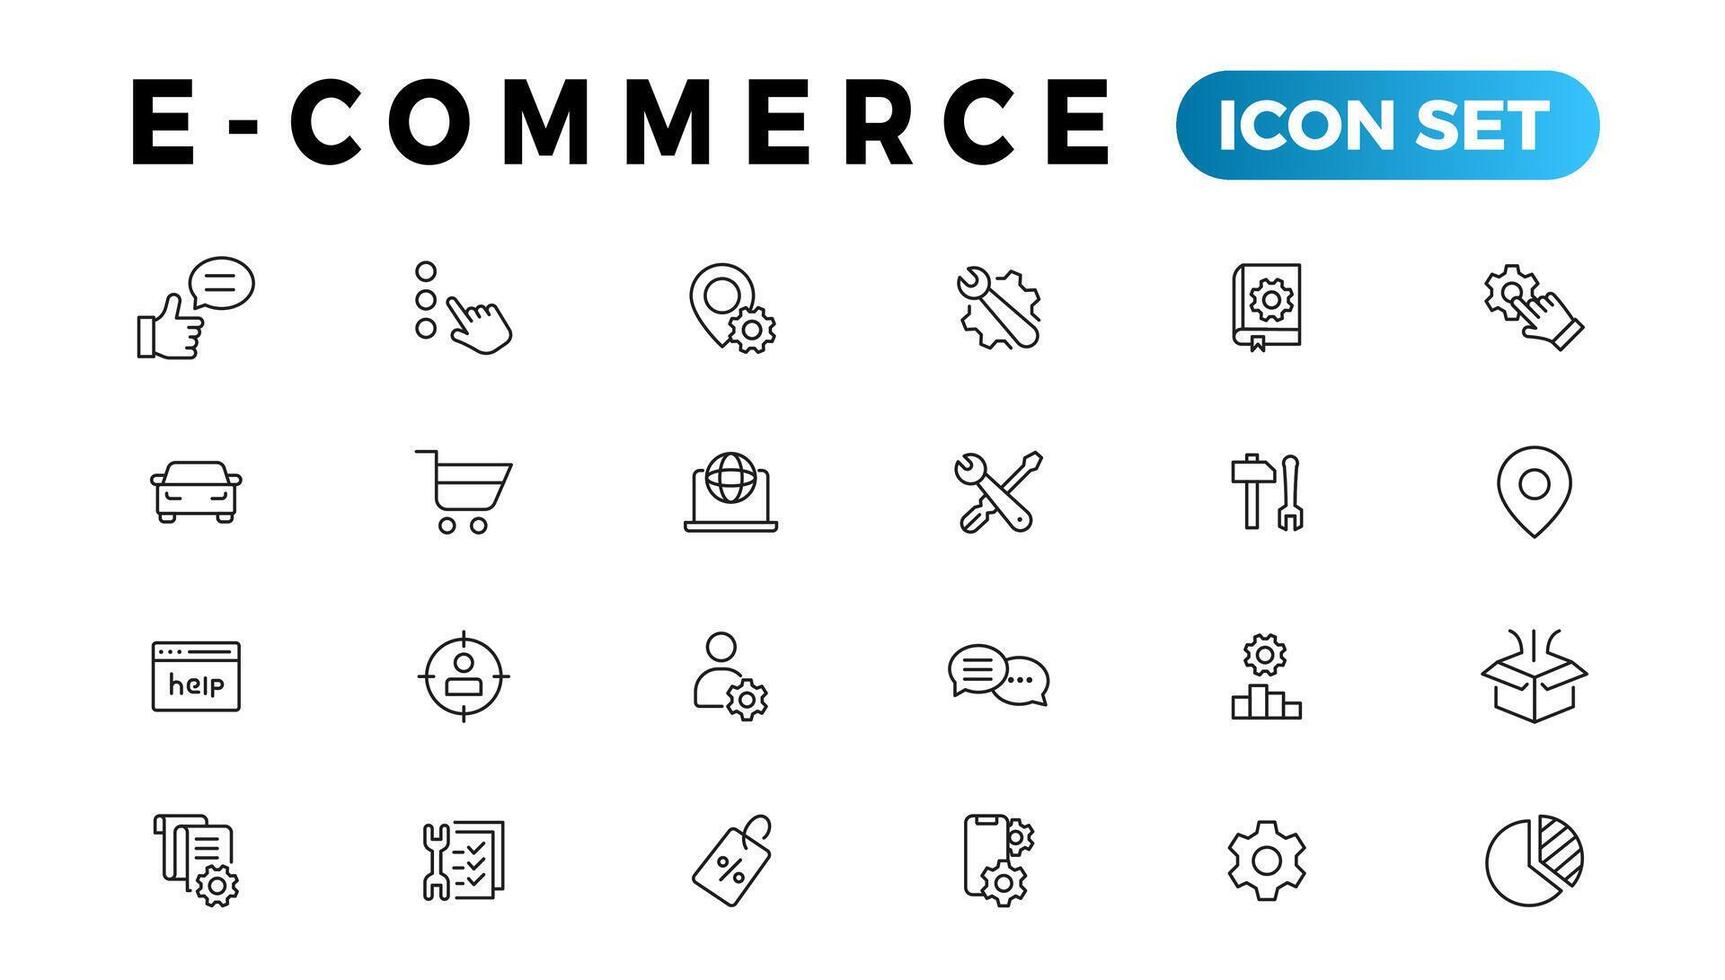 E-commerce icon set. Online shopping and delivery elements. E-business symbol. Icons vector collection.